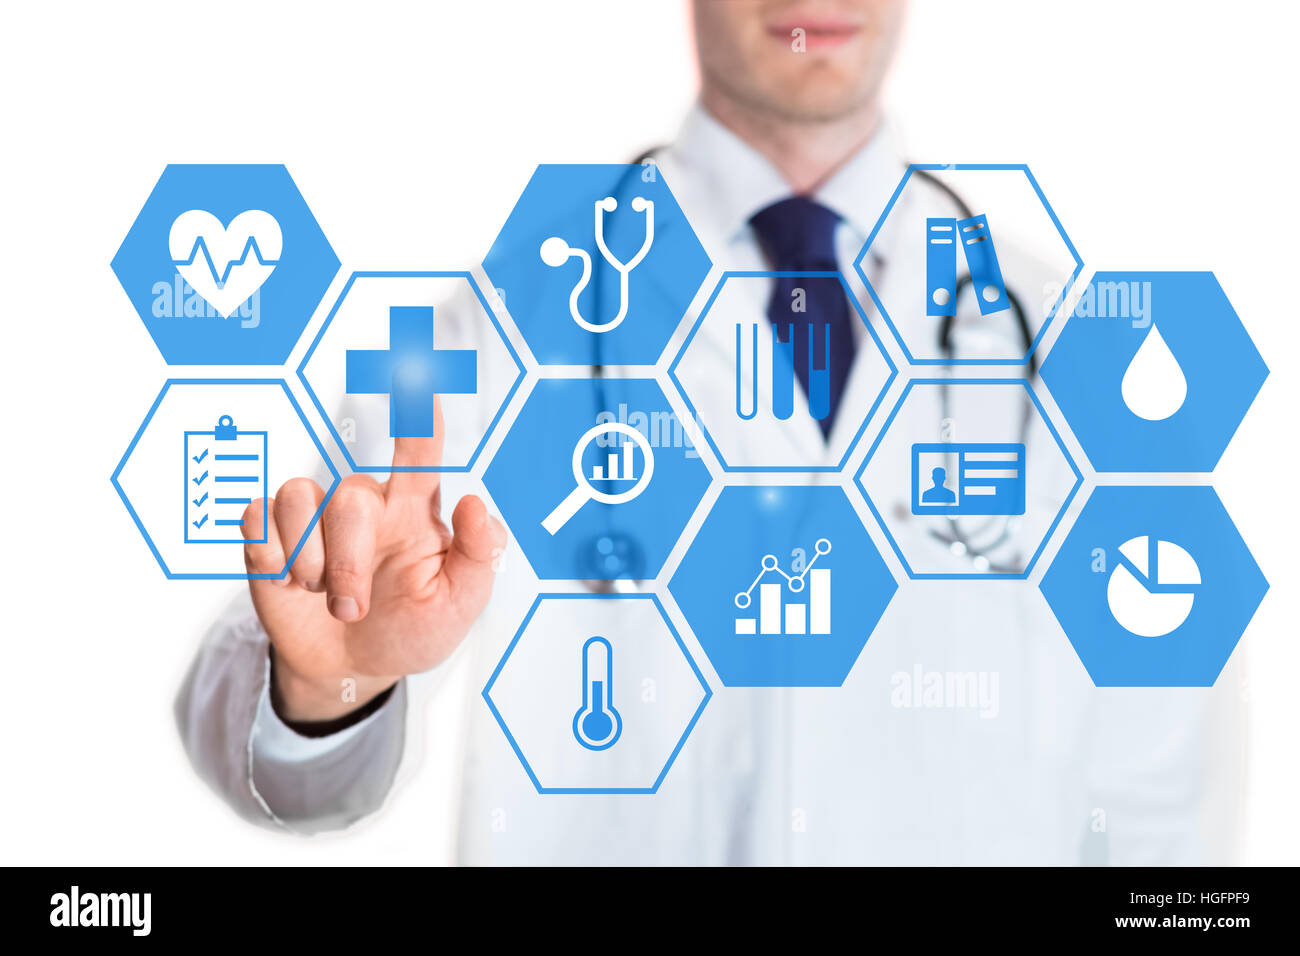 Personal health data concept on a virtual screen with icons about heart rate, blood pressure, body temperature and statistics and a medical doctor Stock Photo